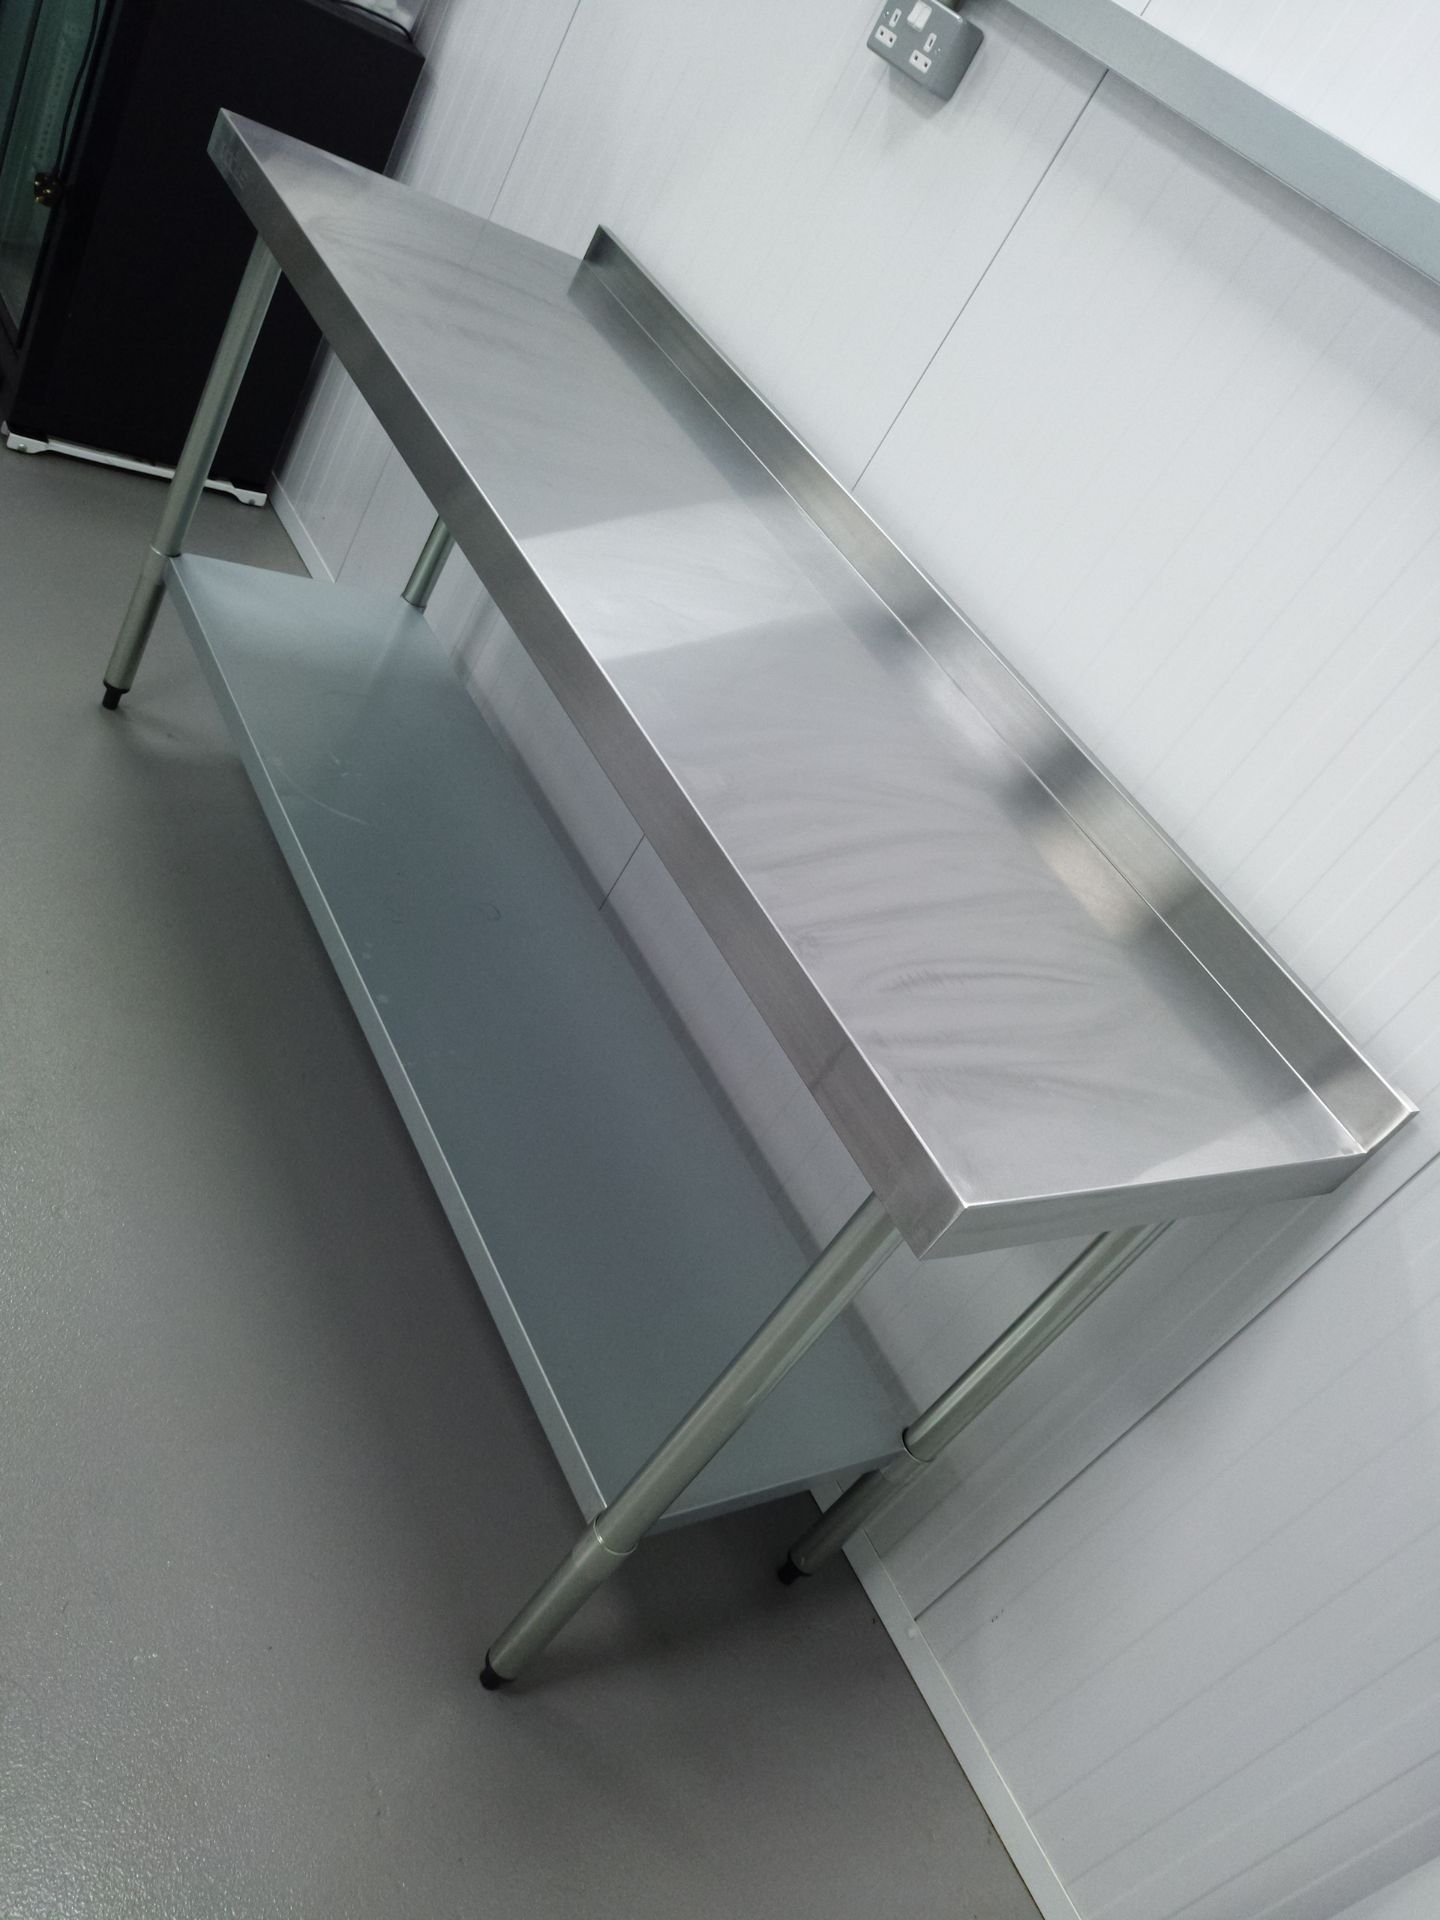 Vogue Stainless Steel Table with Upstand 1800mm - Image 2 of 2